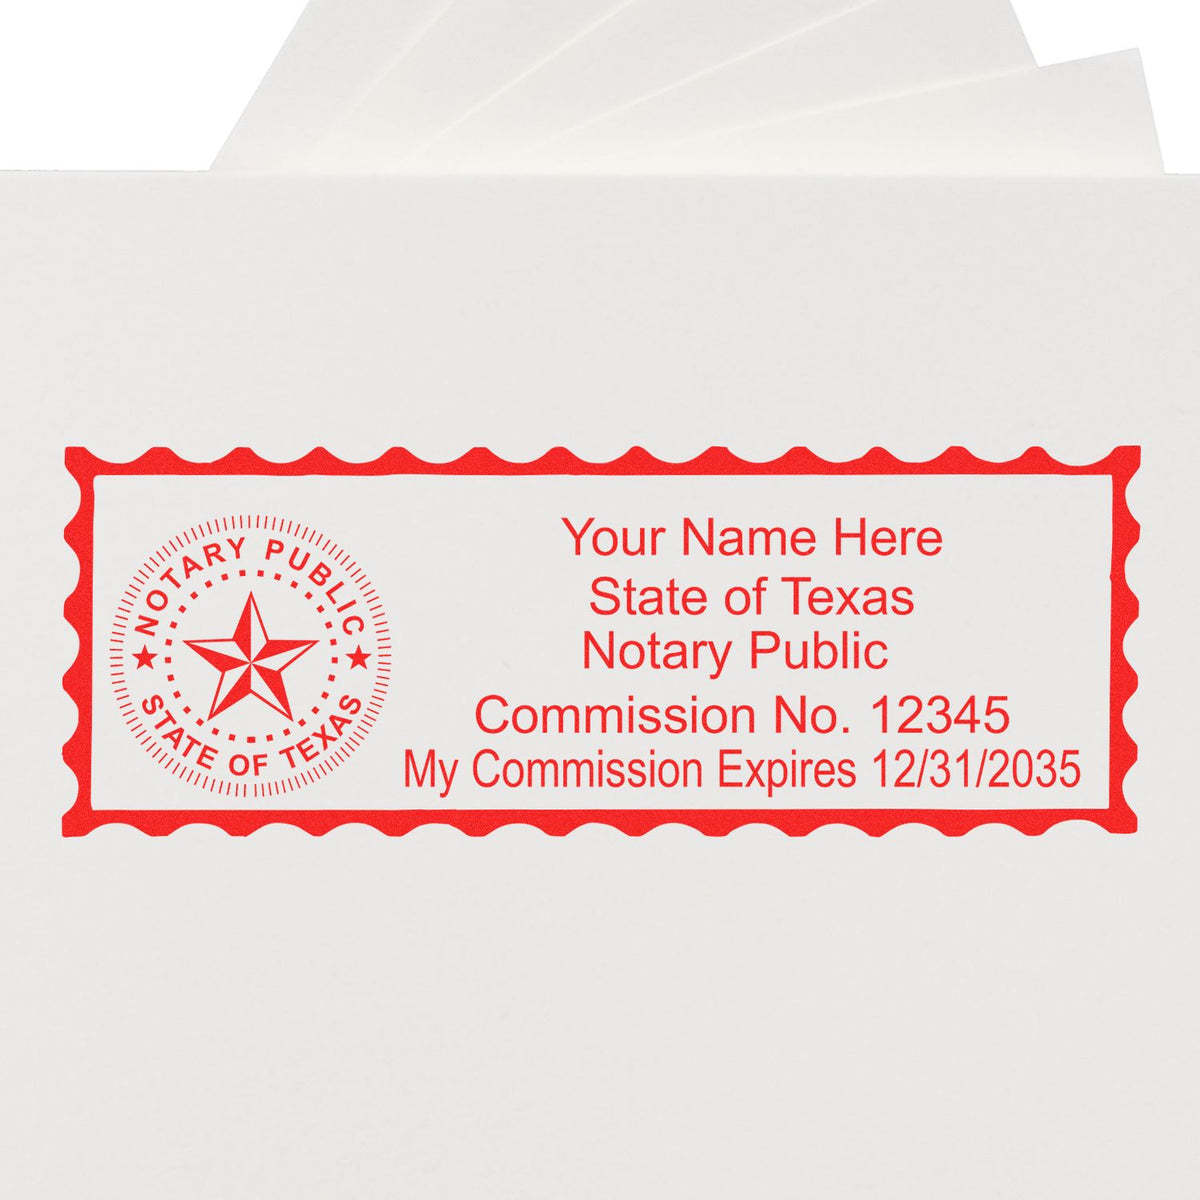 The Self-Inking State Seal Texas Notary Stamp stamp impression comes to life with a crisp, detailed photo on paper - showcasing true professional quality.